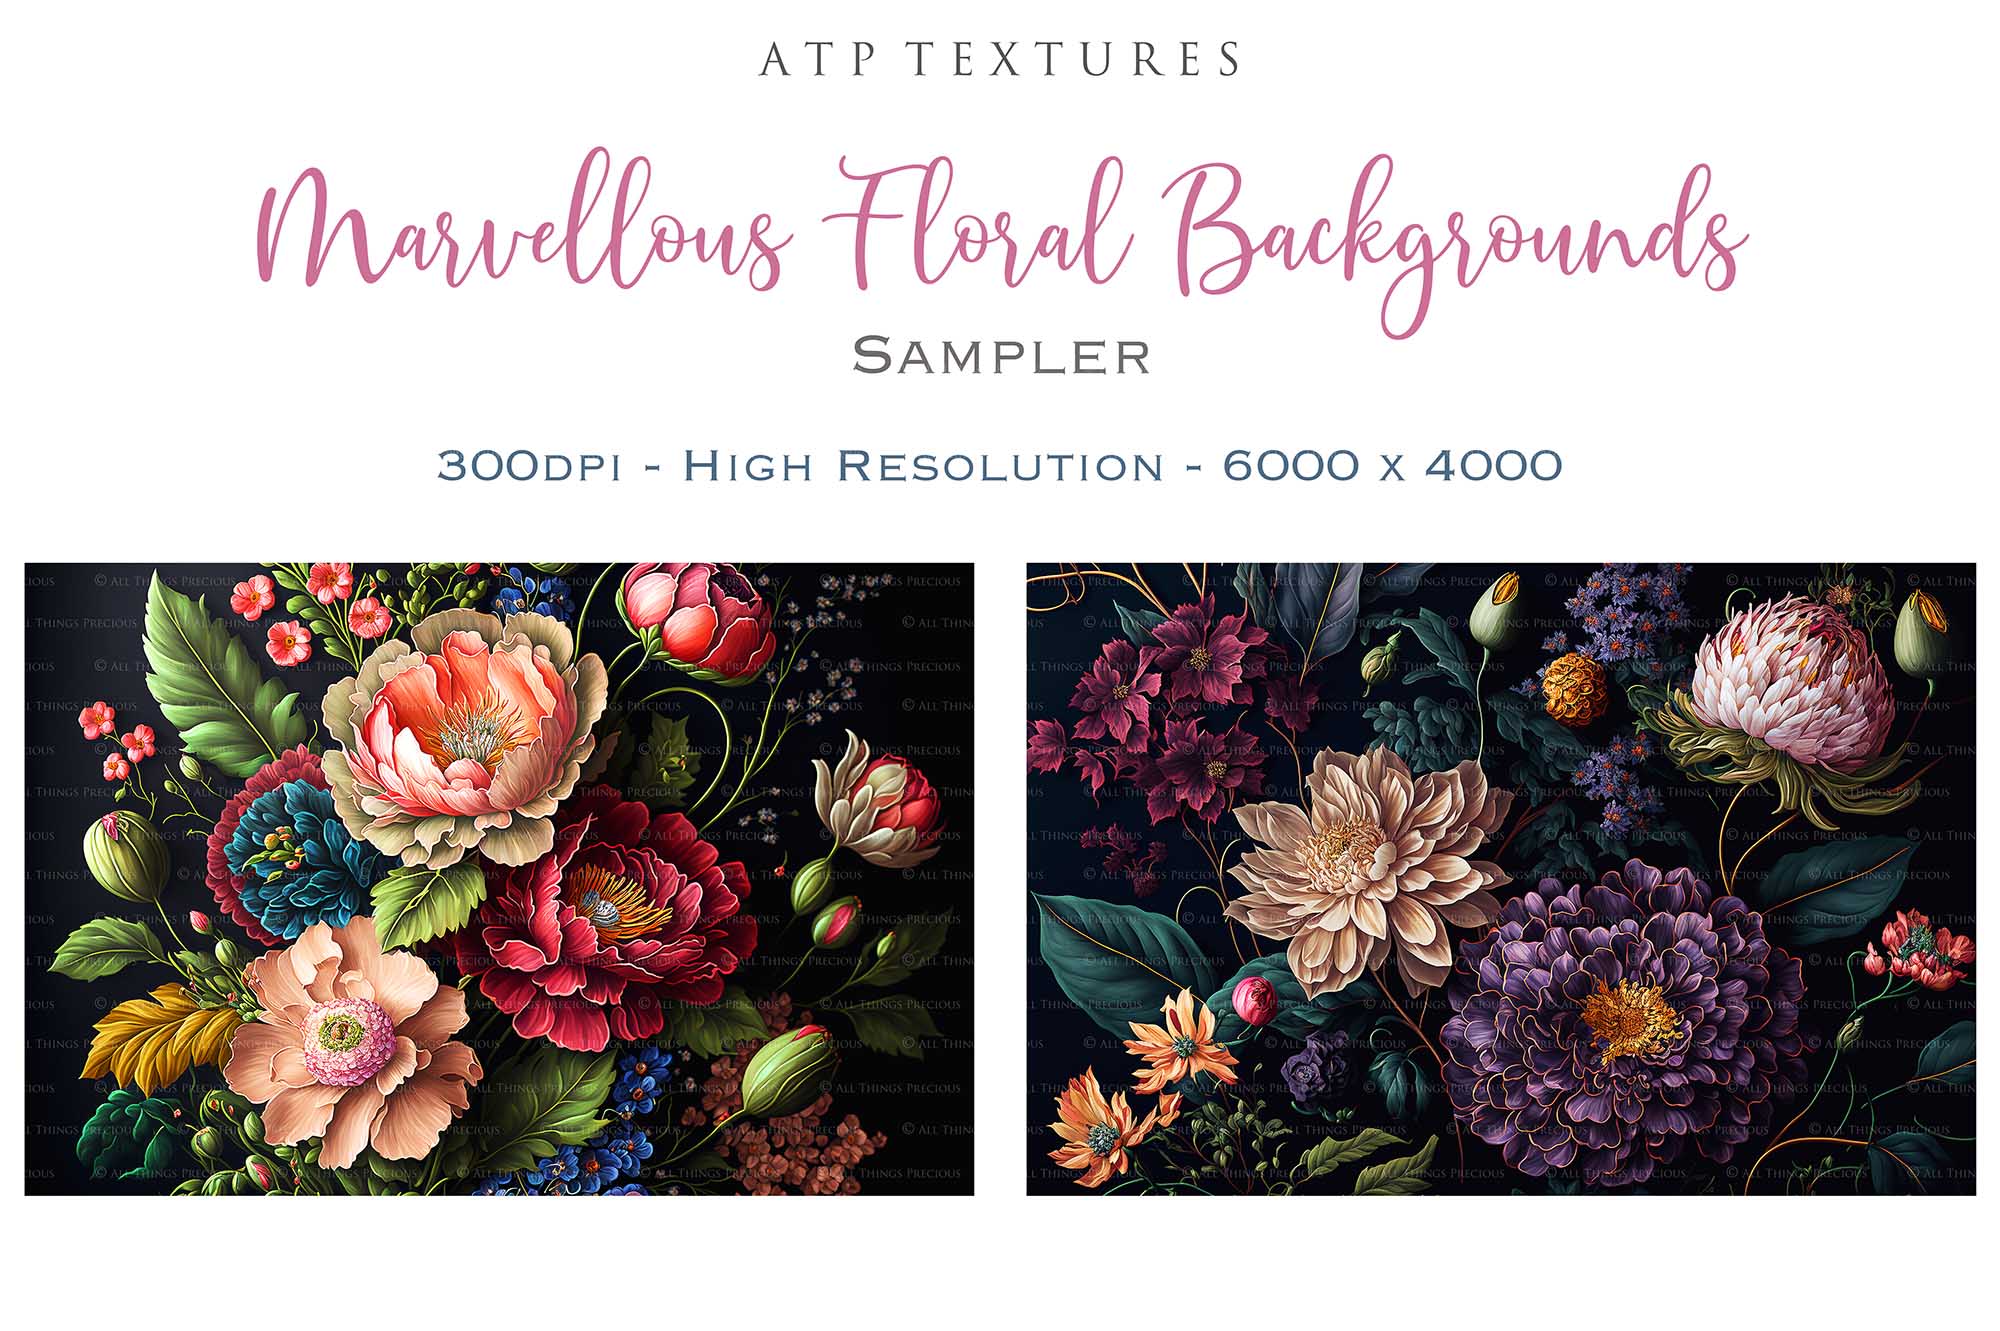 Digital Background for photography, digital art and print. Flower backgrounds are in high resolution, 300dpi, in rich colours. These are created in AI and have been edited, resized and created with photographers in mind. Print as a backdrop or art.